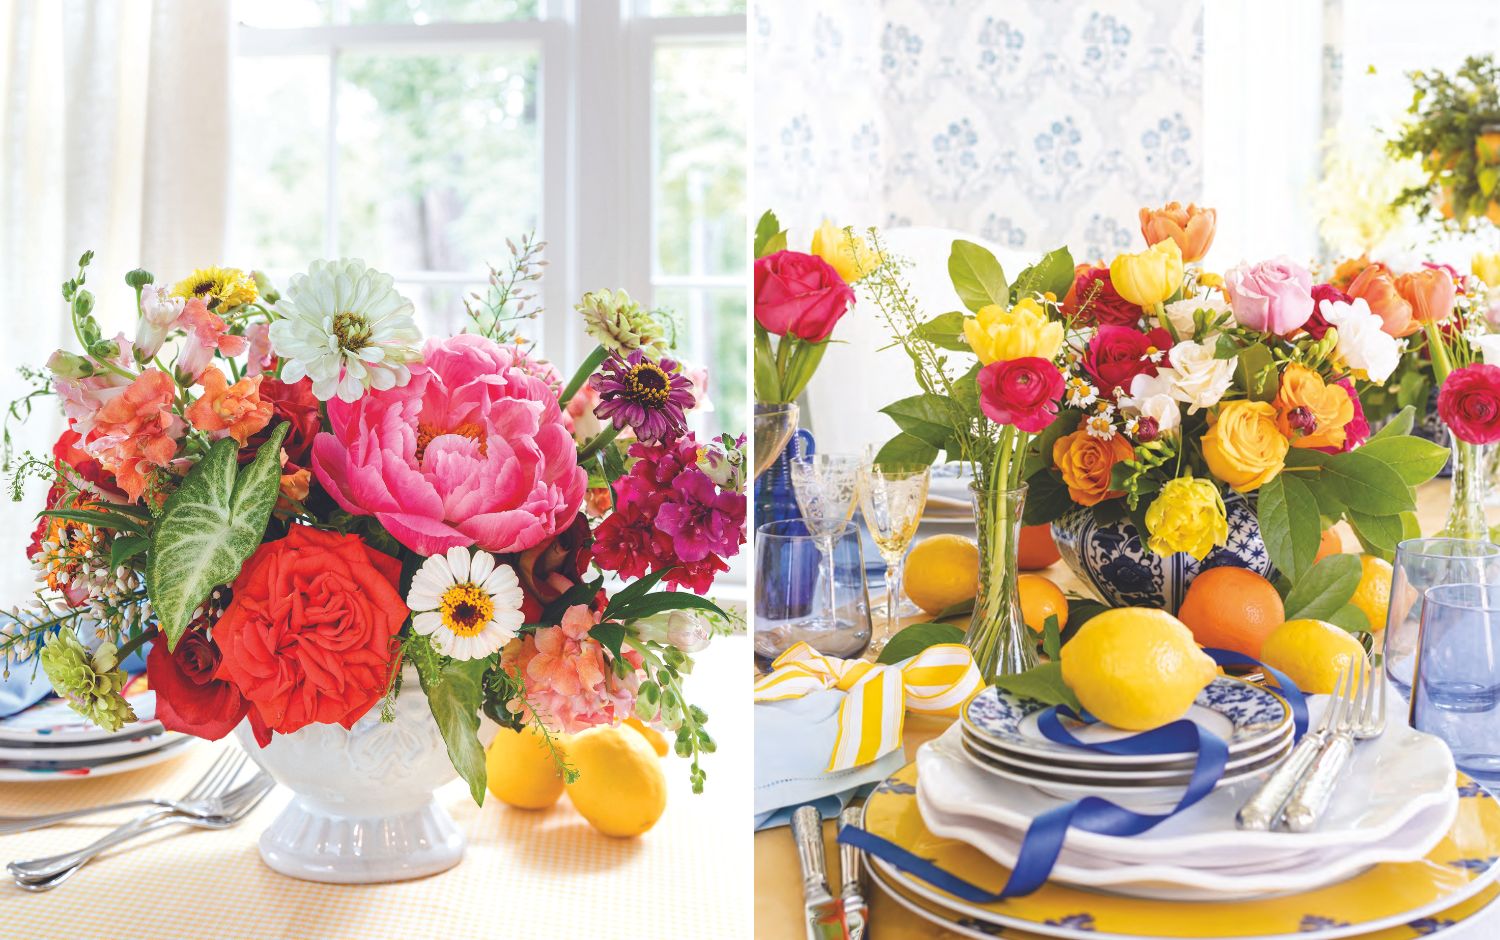 5 Lavish Floral Displays for Spring - Southern Lady Magazine